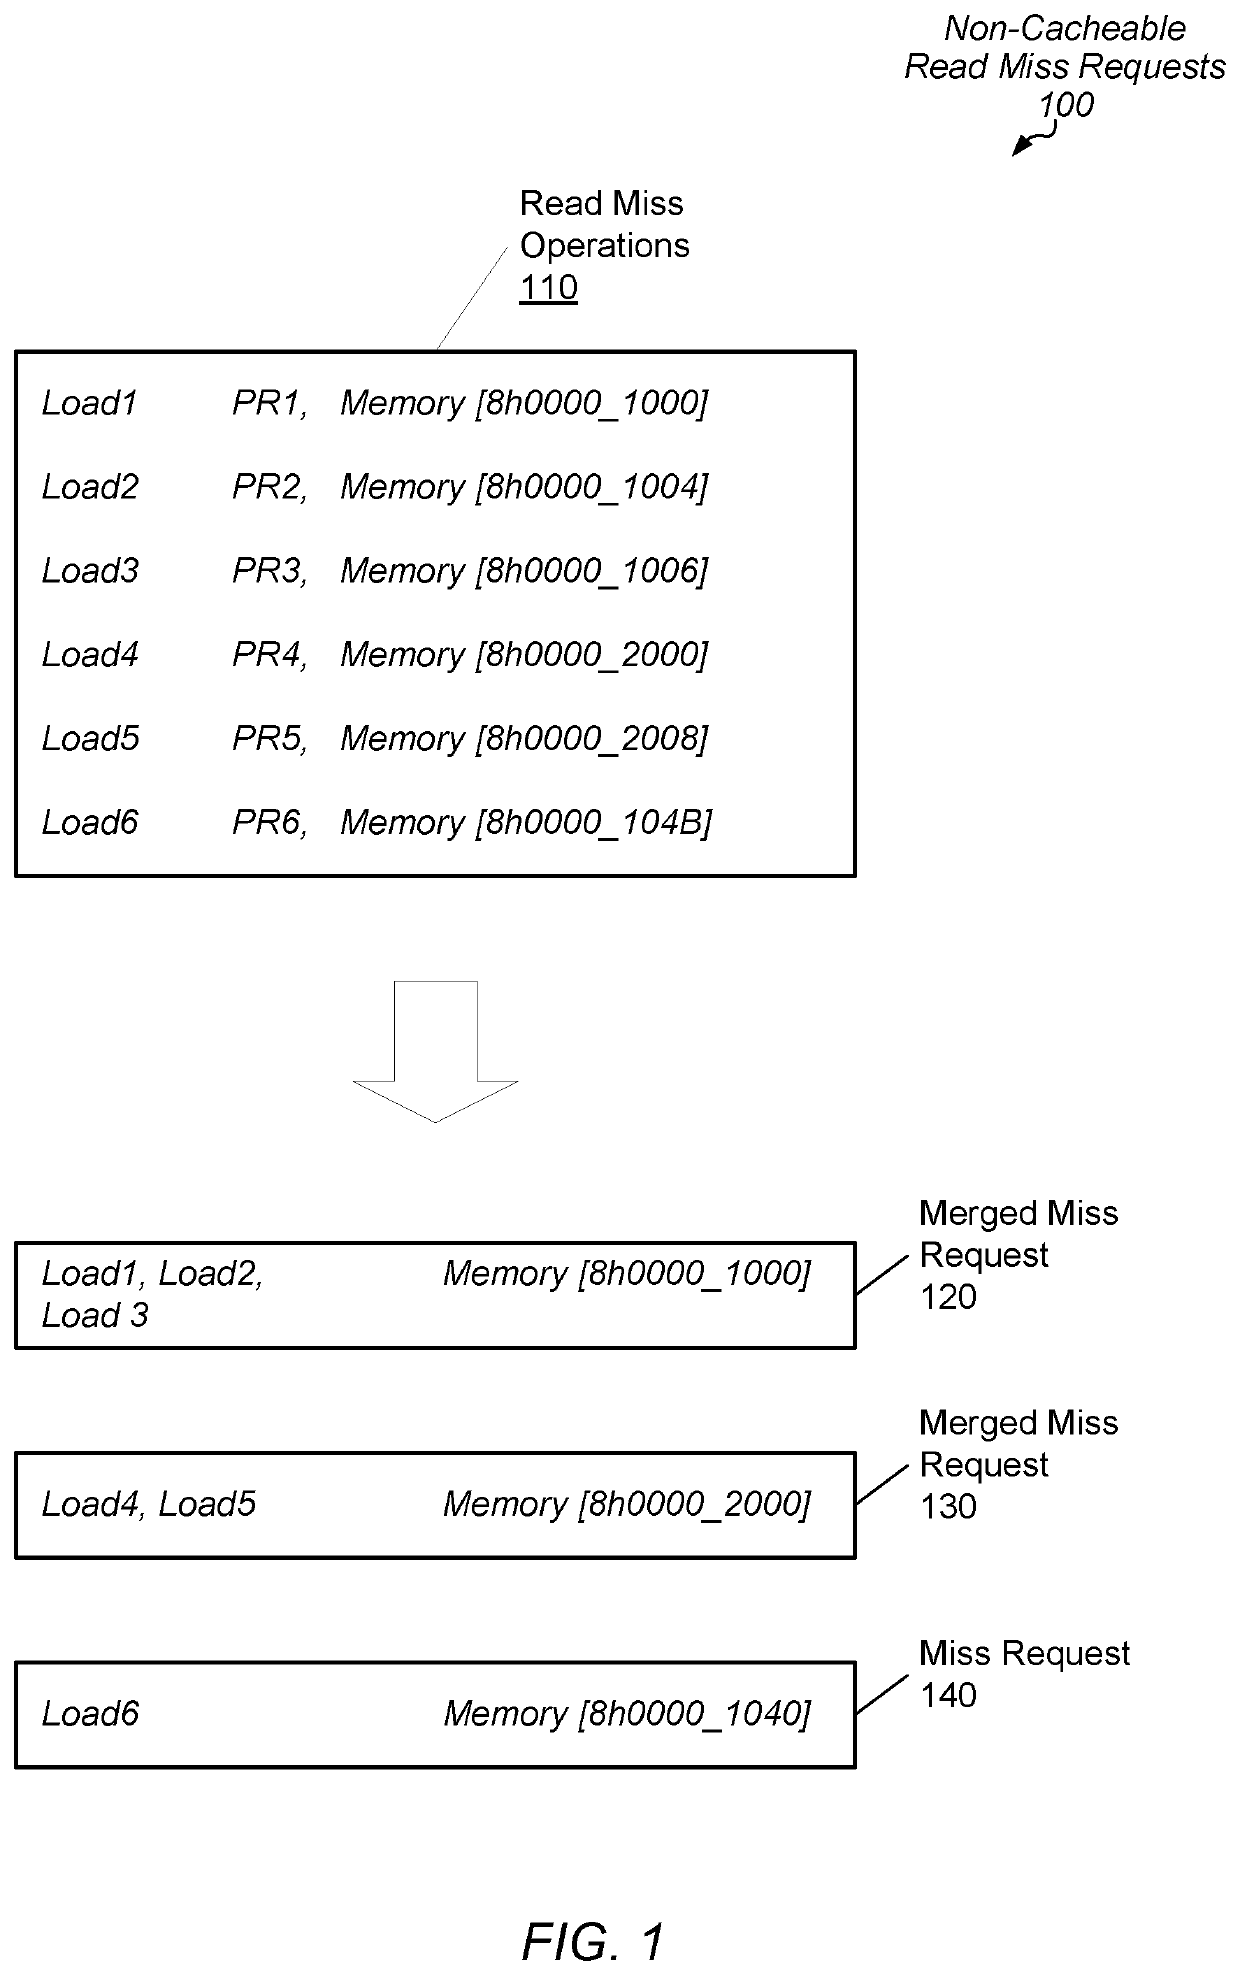 Managing serial miss requests for load operations in a non-coherent memory system